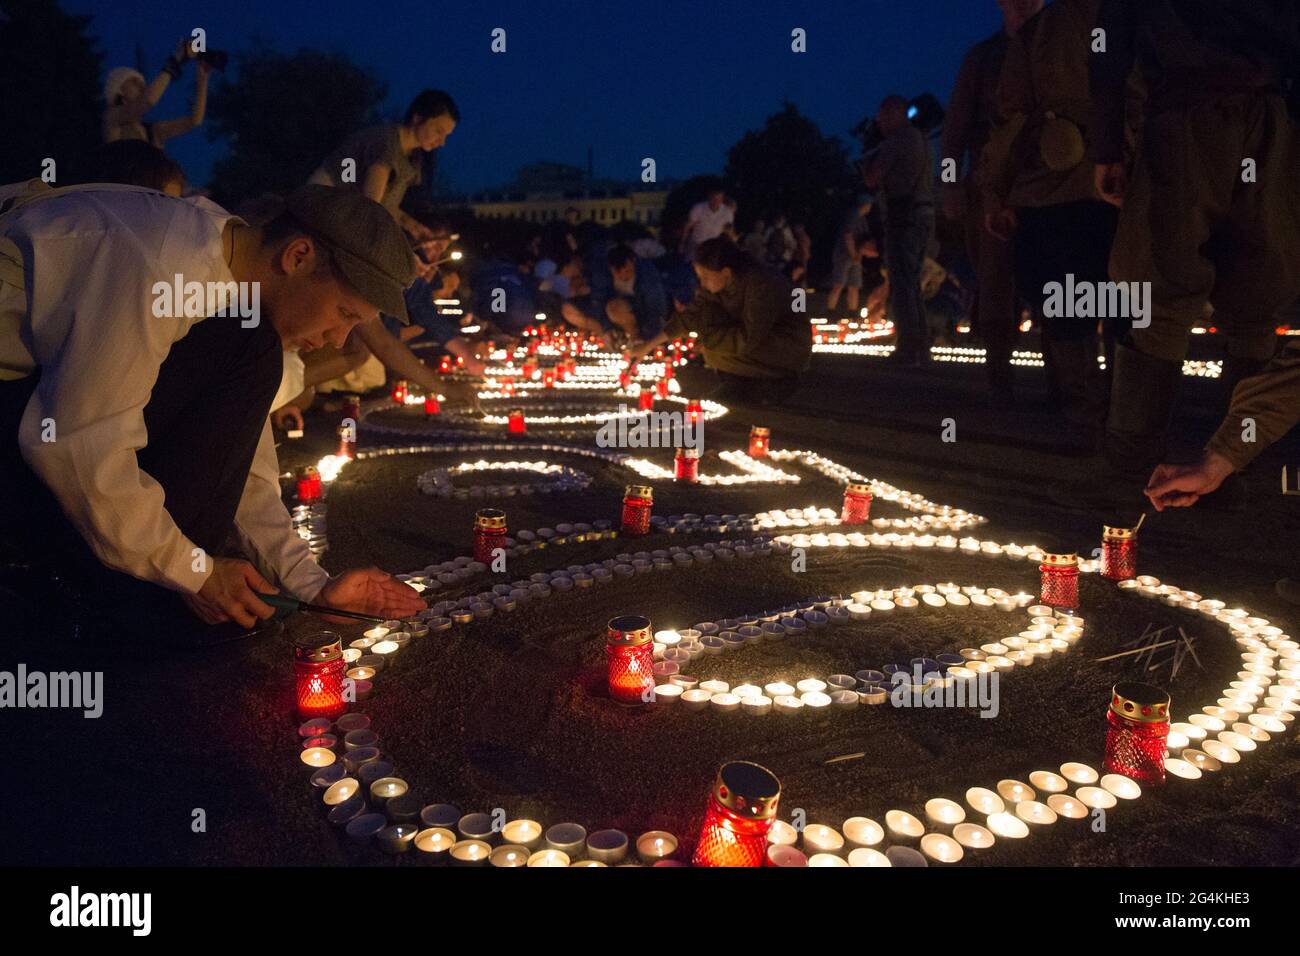 St. Petersburg, Russia. 22nd June, 2021. People take part in a memorial ceremony marking the 80th anniversary of the start of the Great Patriotic War (1941-1945) in St. Petersburg, Russia, June 22, 2021. Credit: Irina Motina/Xinhua/Alamy Live News Stock Photo